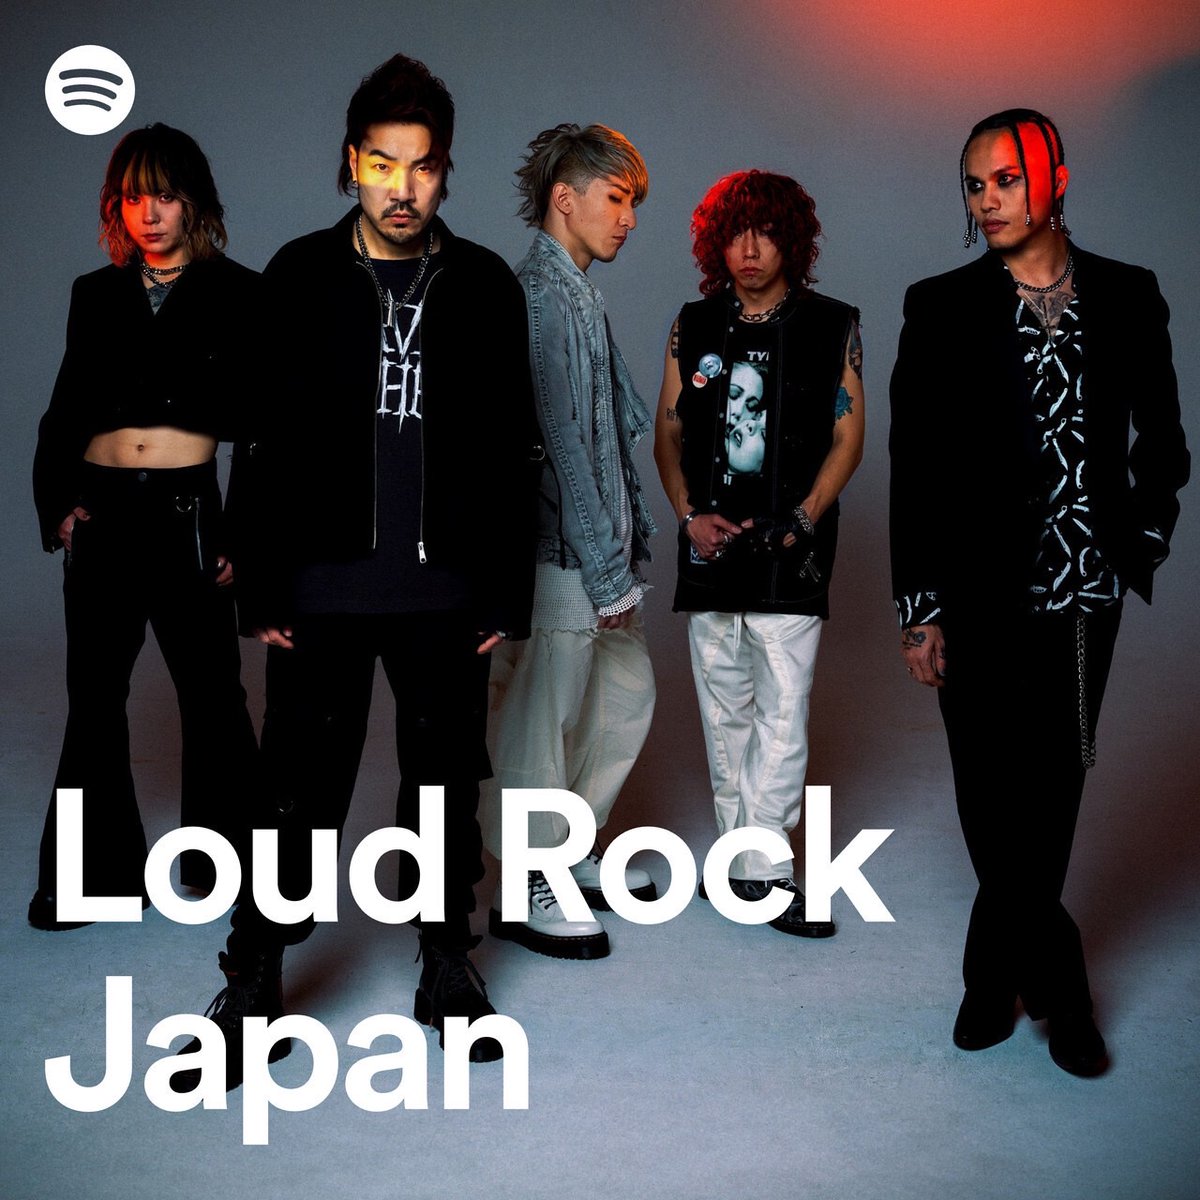 Spotify「Loud Rock Japan」プレイリストのカバーに選出されました！ 新曲「L.A.M.N feat. Bobby Wolfgang」もチェックしてください！ Crossfaith is now on the cover of Spotifys 'Loud Rock Japan' playlist! Thank you ＠SpotifyJP @Spotify Listen to ▷　open.spotify.com/playlist/37i9d…